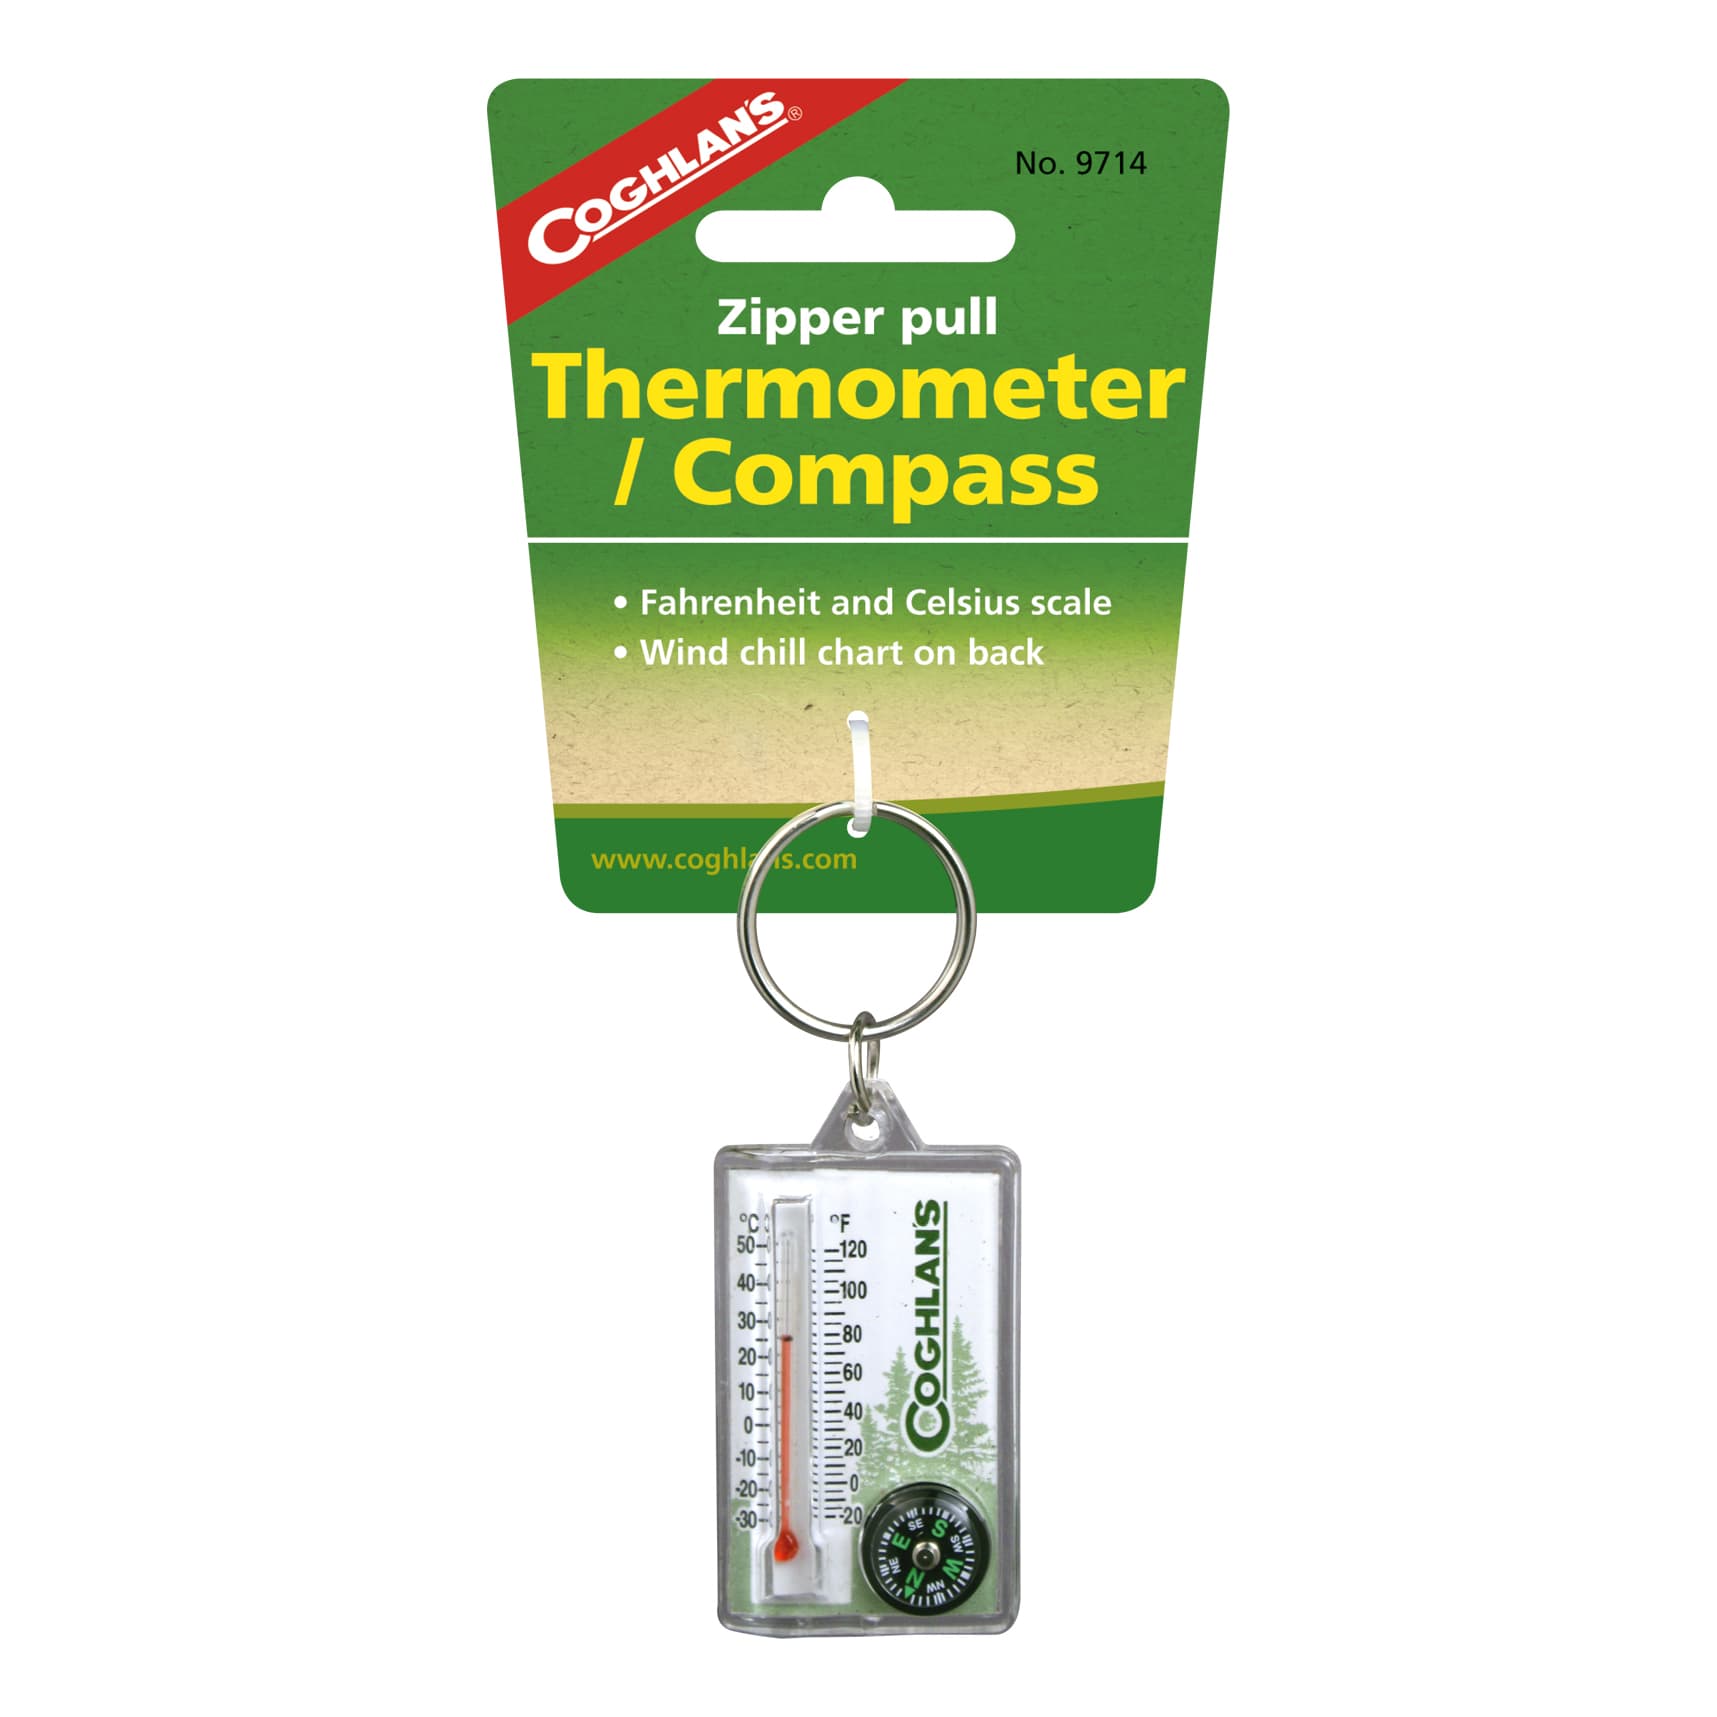 Coghlan's Zipper Pull Thermometer With Compass